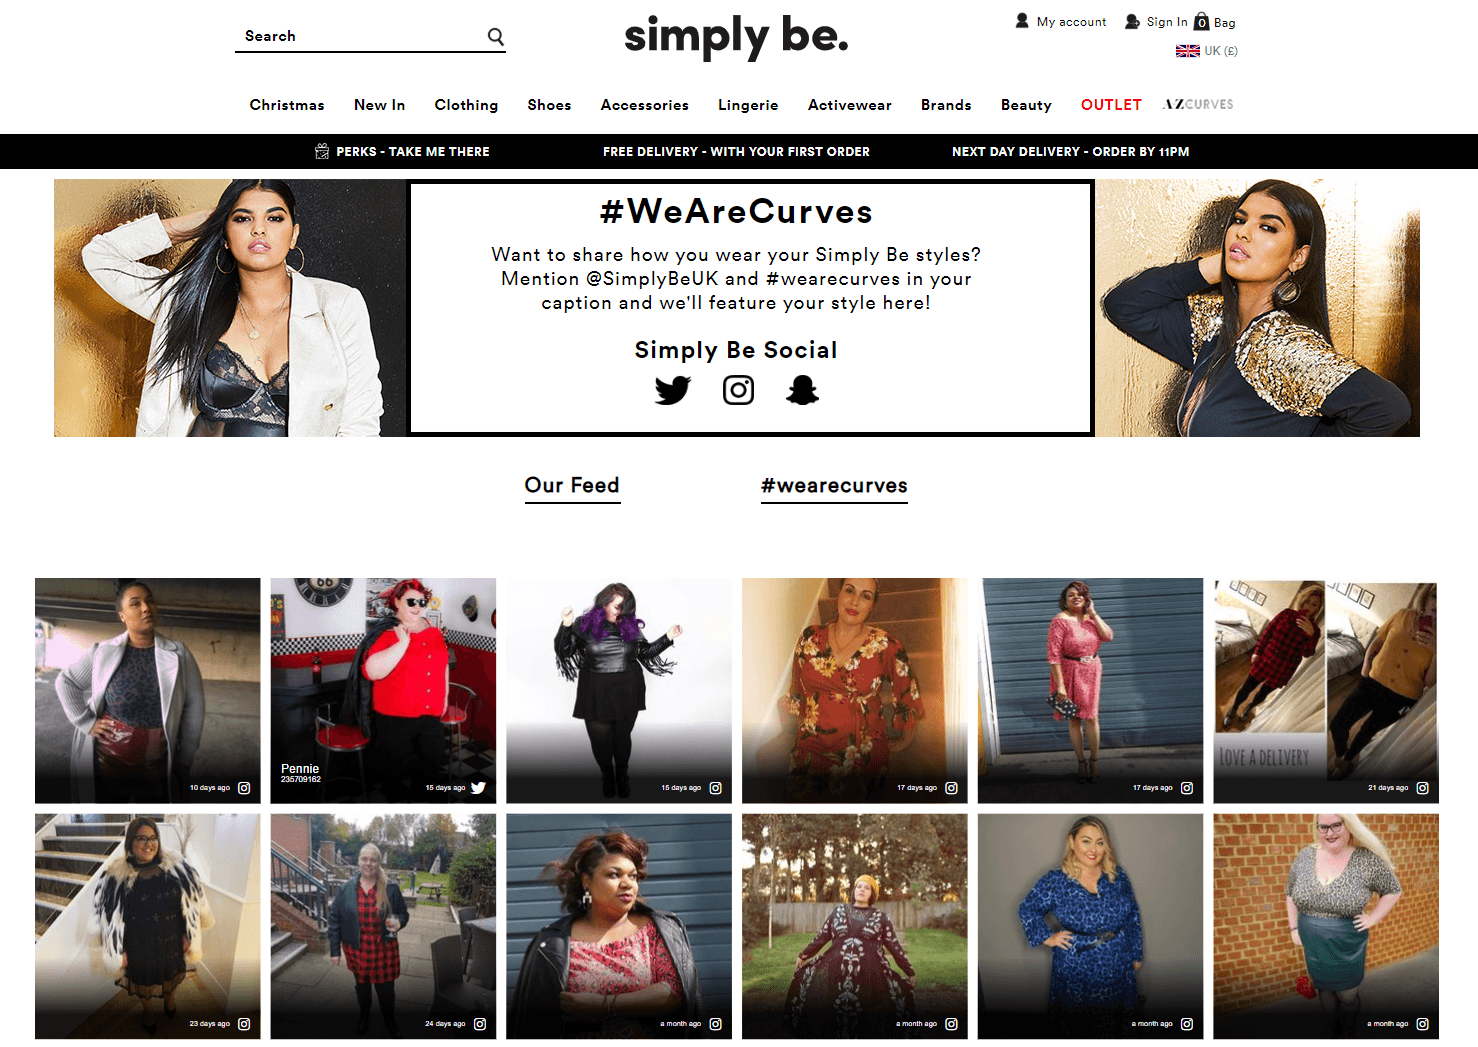 SimplyBe promotes a body-positive campaign, in which they encourage members to share photos where they are proudly wearing the company’s garments.